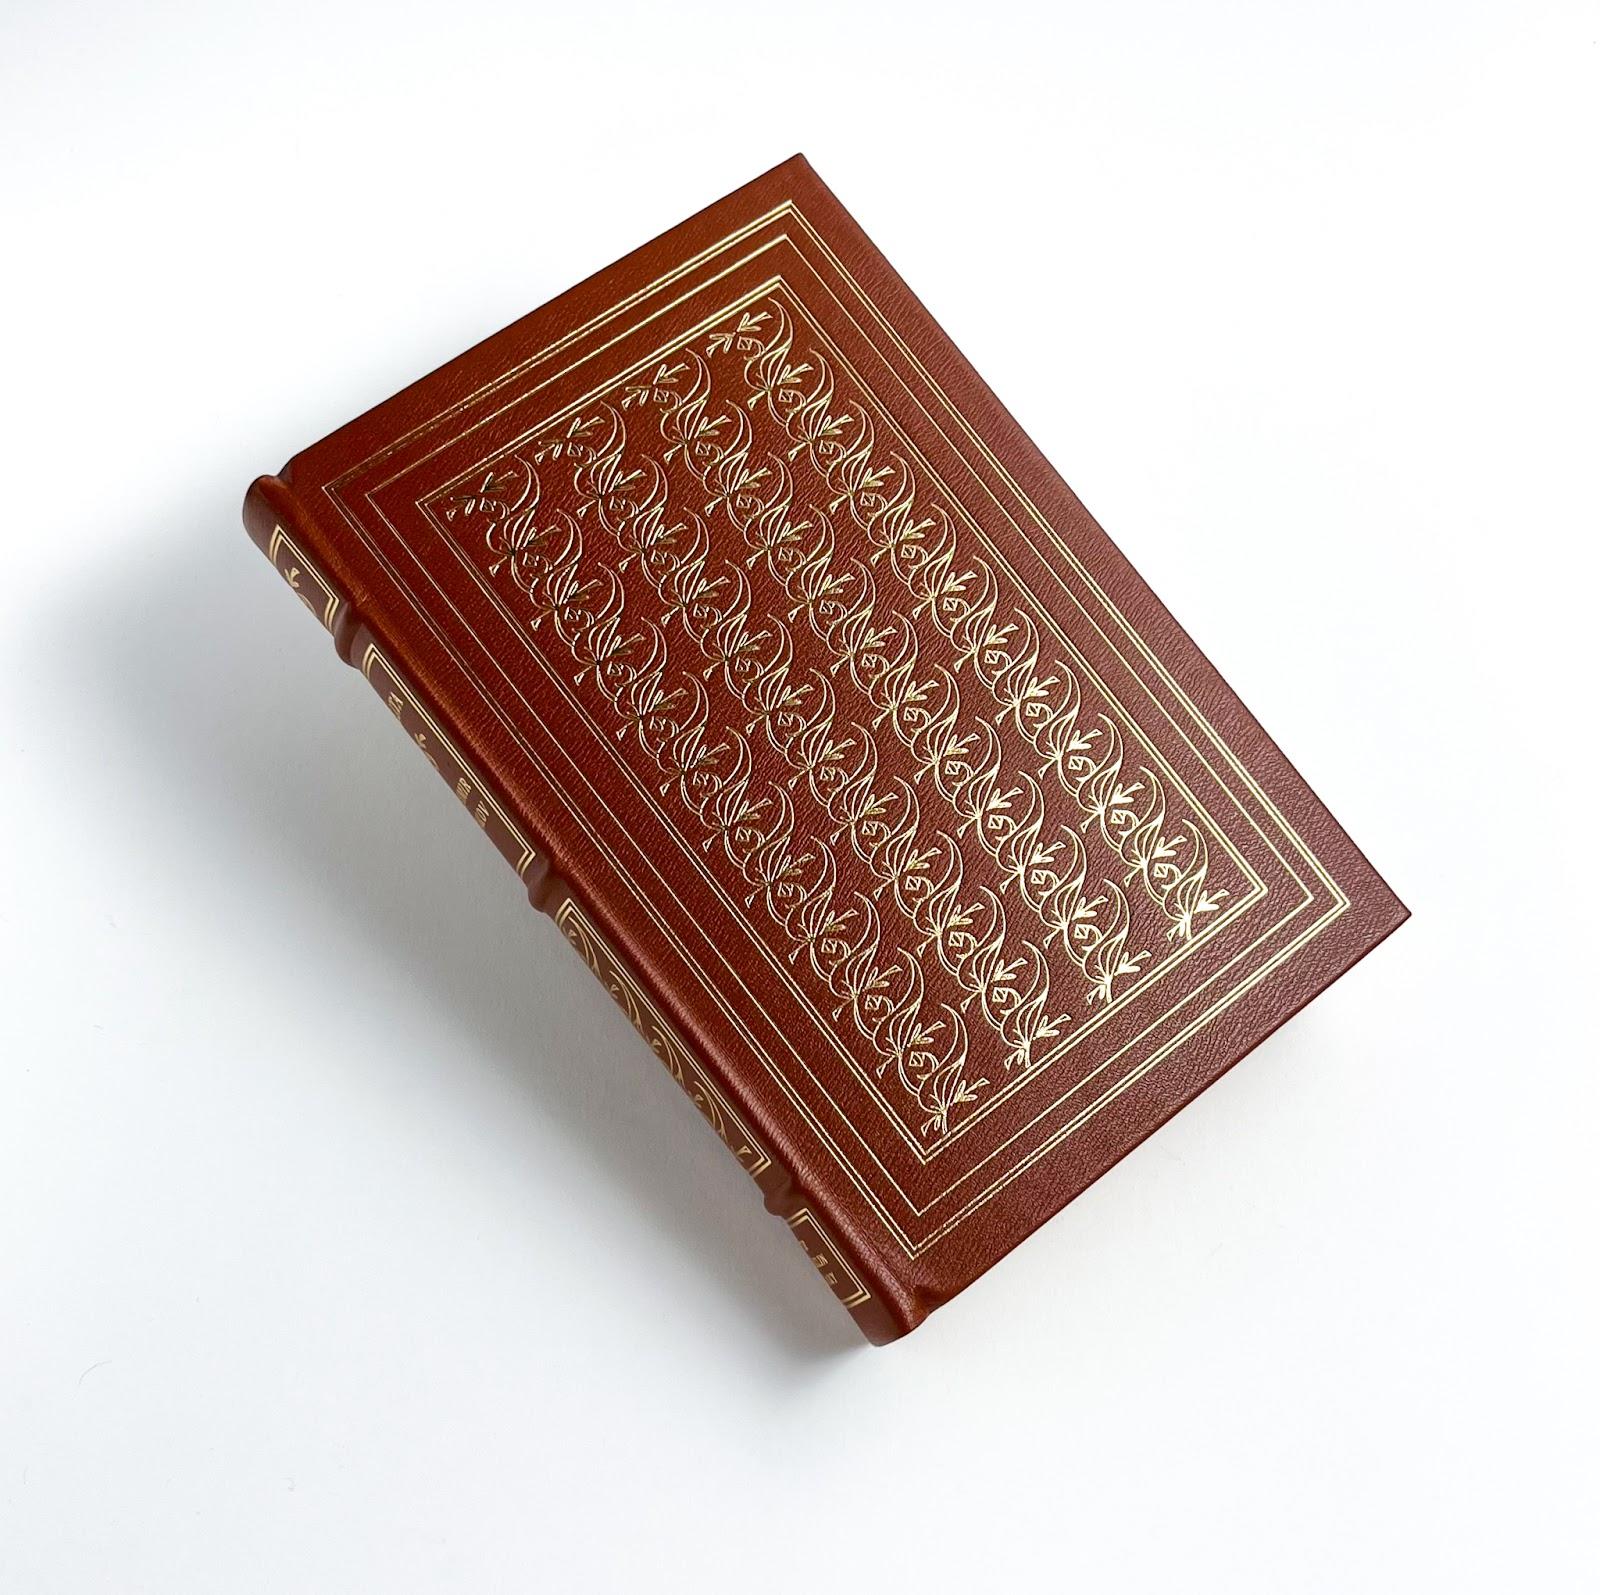 Gilt-stamped leather binding of the Franklin Library edition of Lolita, 1979.